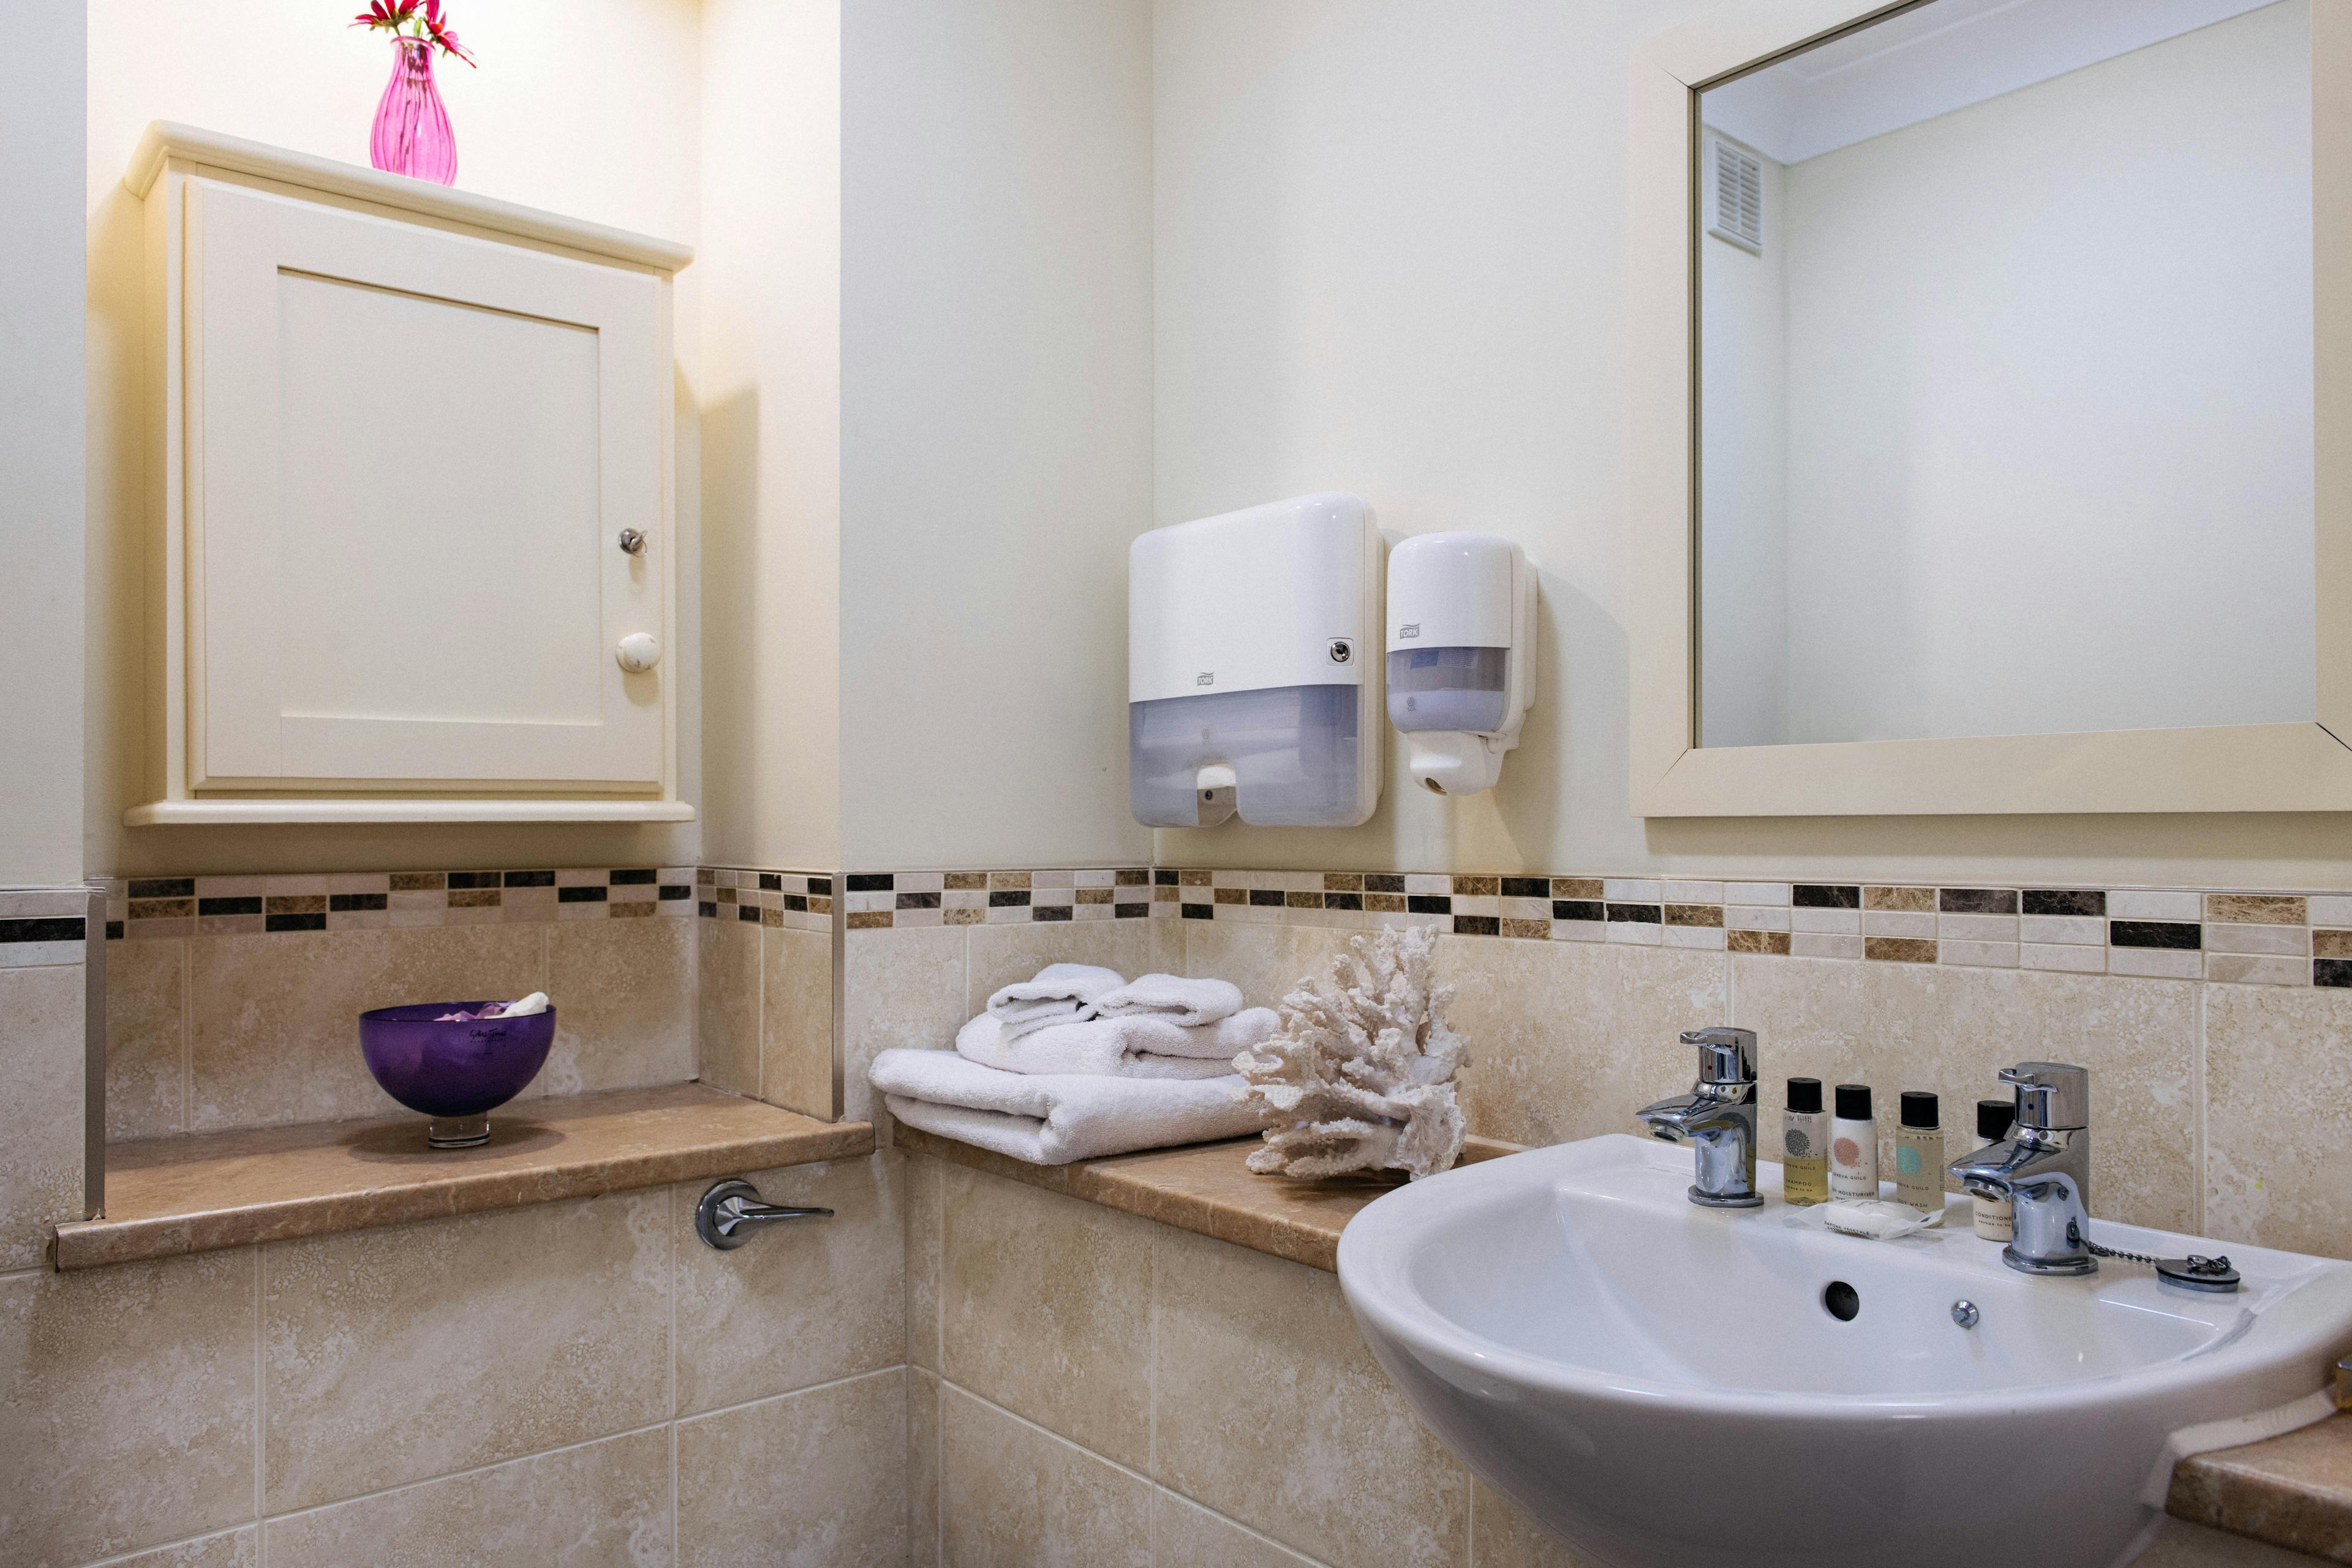  Bathroom at Reigate Beaumont Care Home in Reigate, Surrey